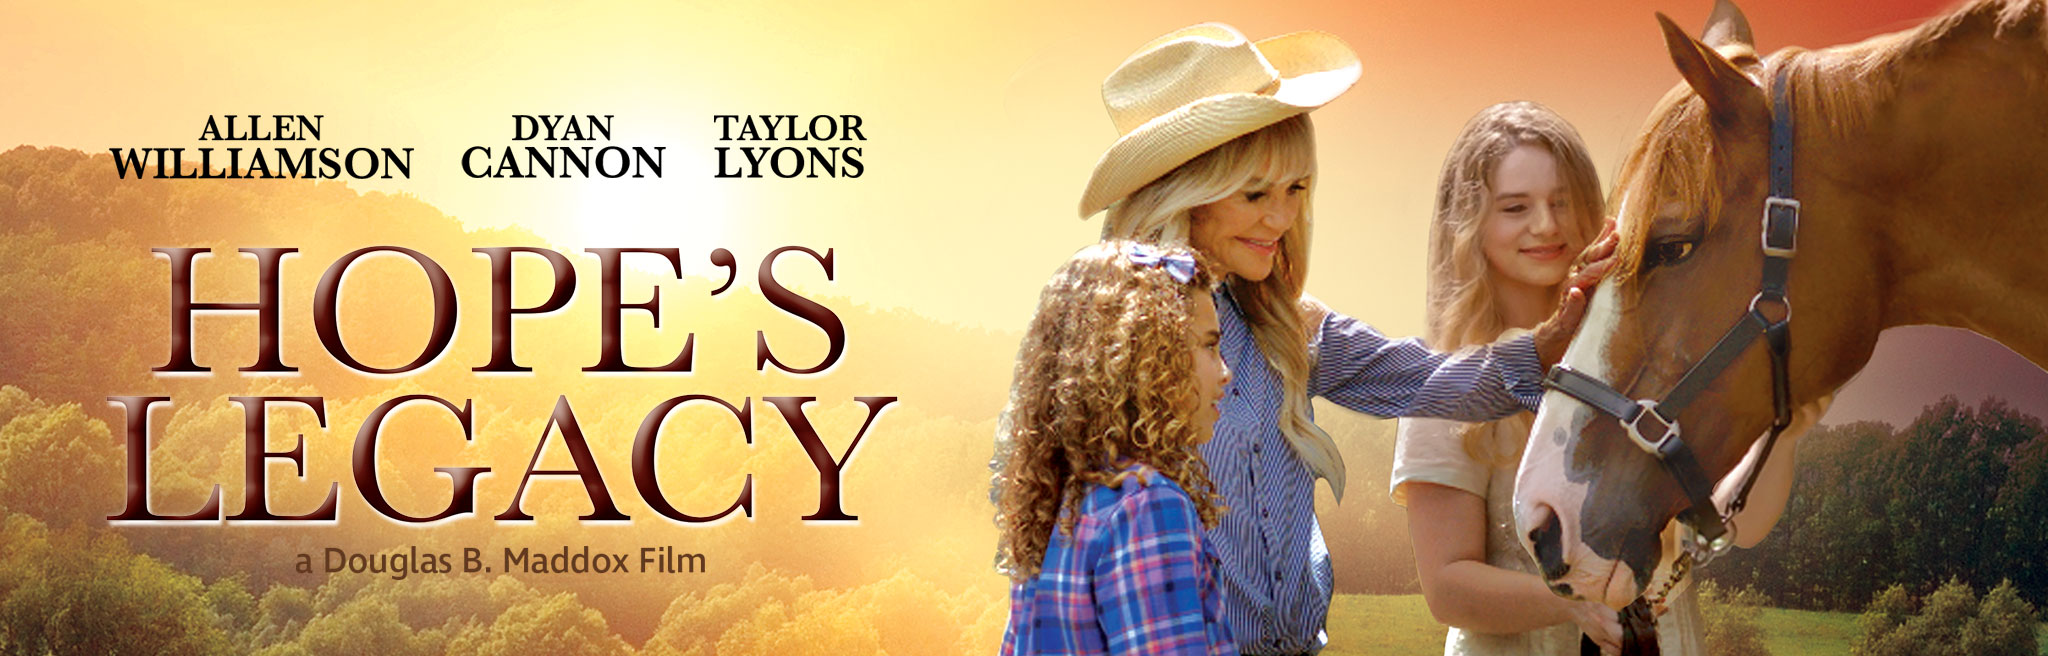 Hope Legacy starring Dyan Cannon